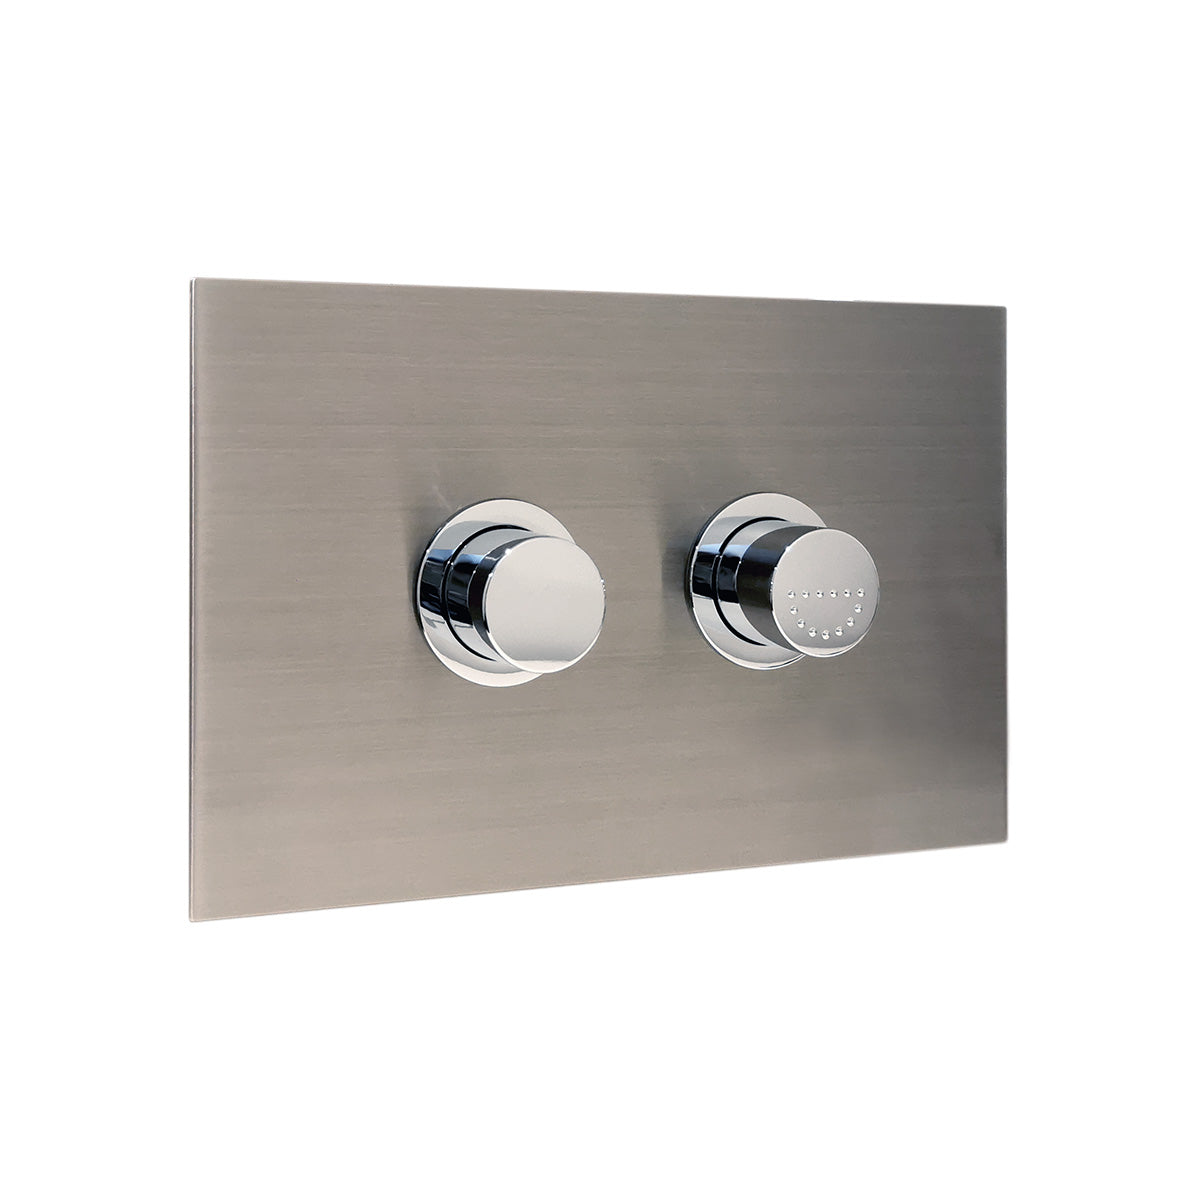 Ultra Access Pneumatic Push Plate Stainless Steel